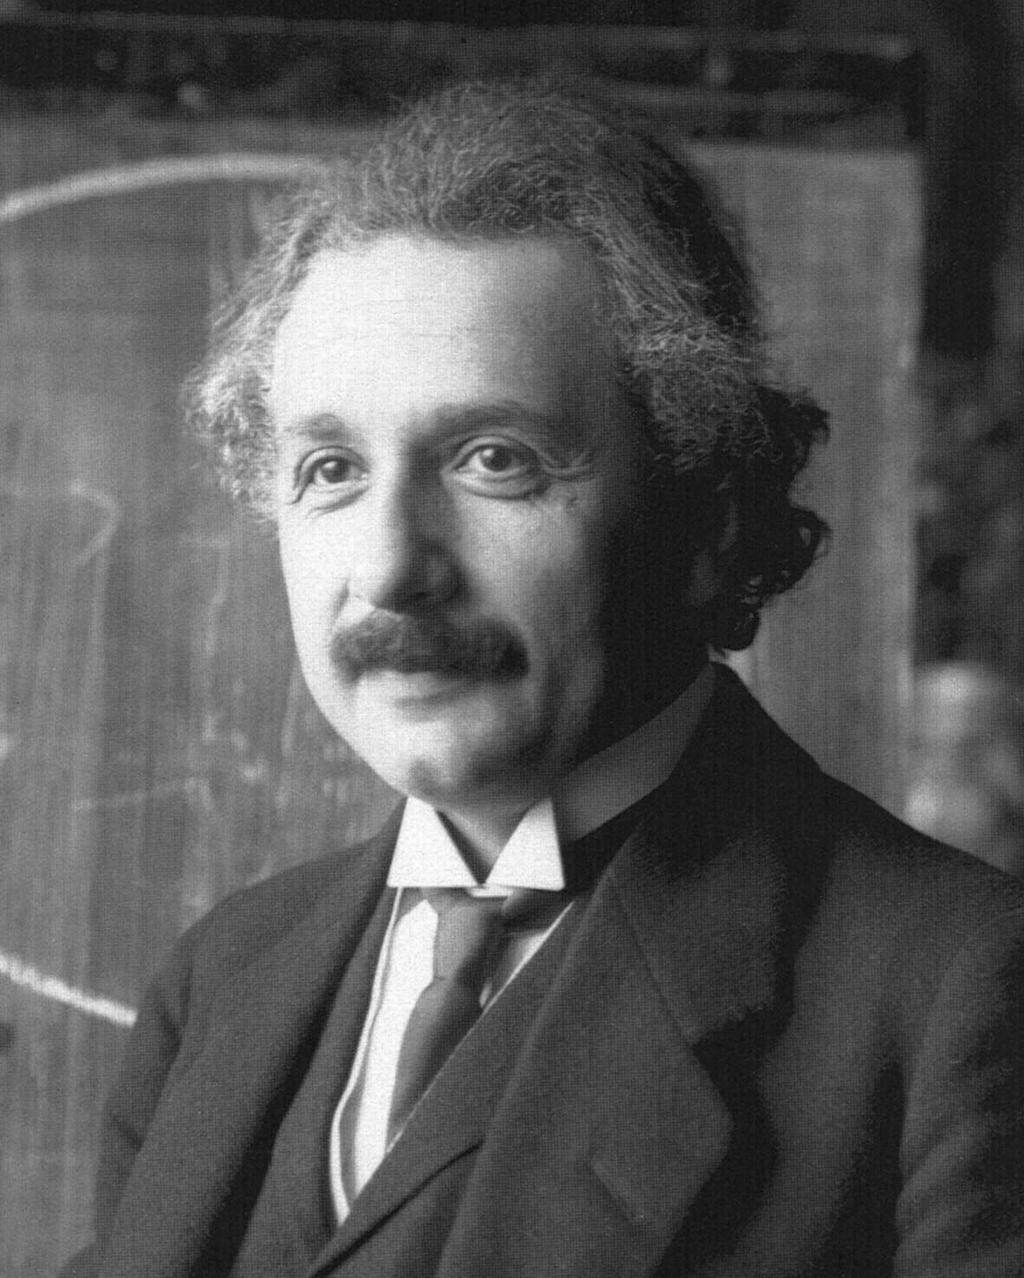 Einstein suggested that the electromagnetic radiation field is quantized into particles called photons Each photon has the energy quantum Albert Einstein (1879-1955) E photon = h ν = h c λ where ν is